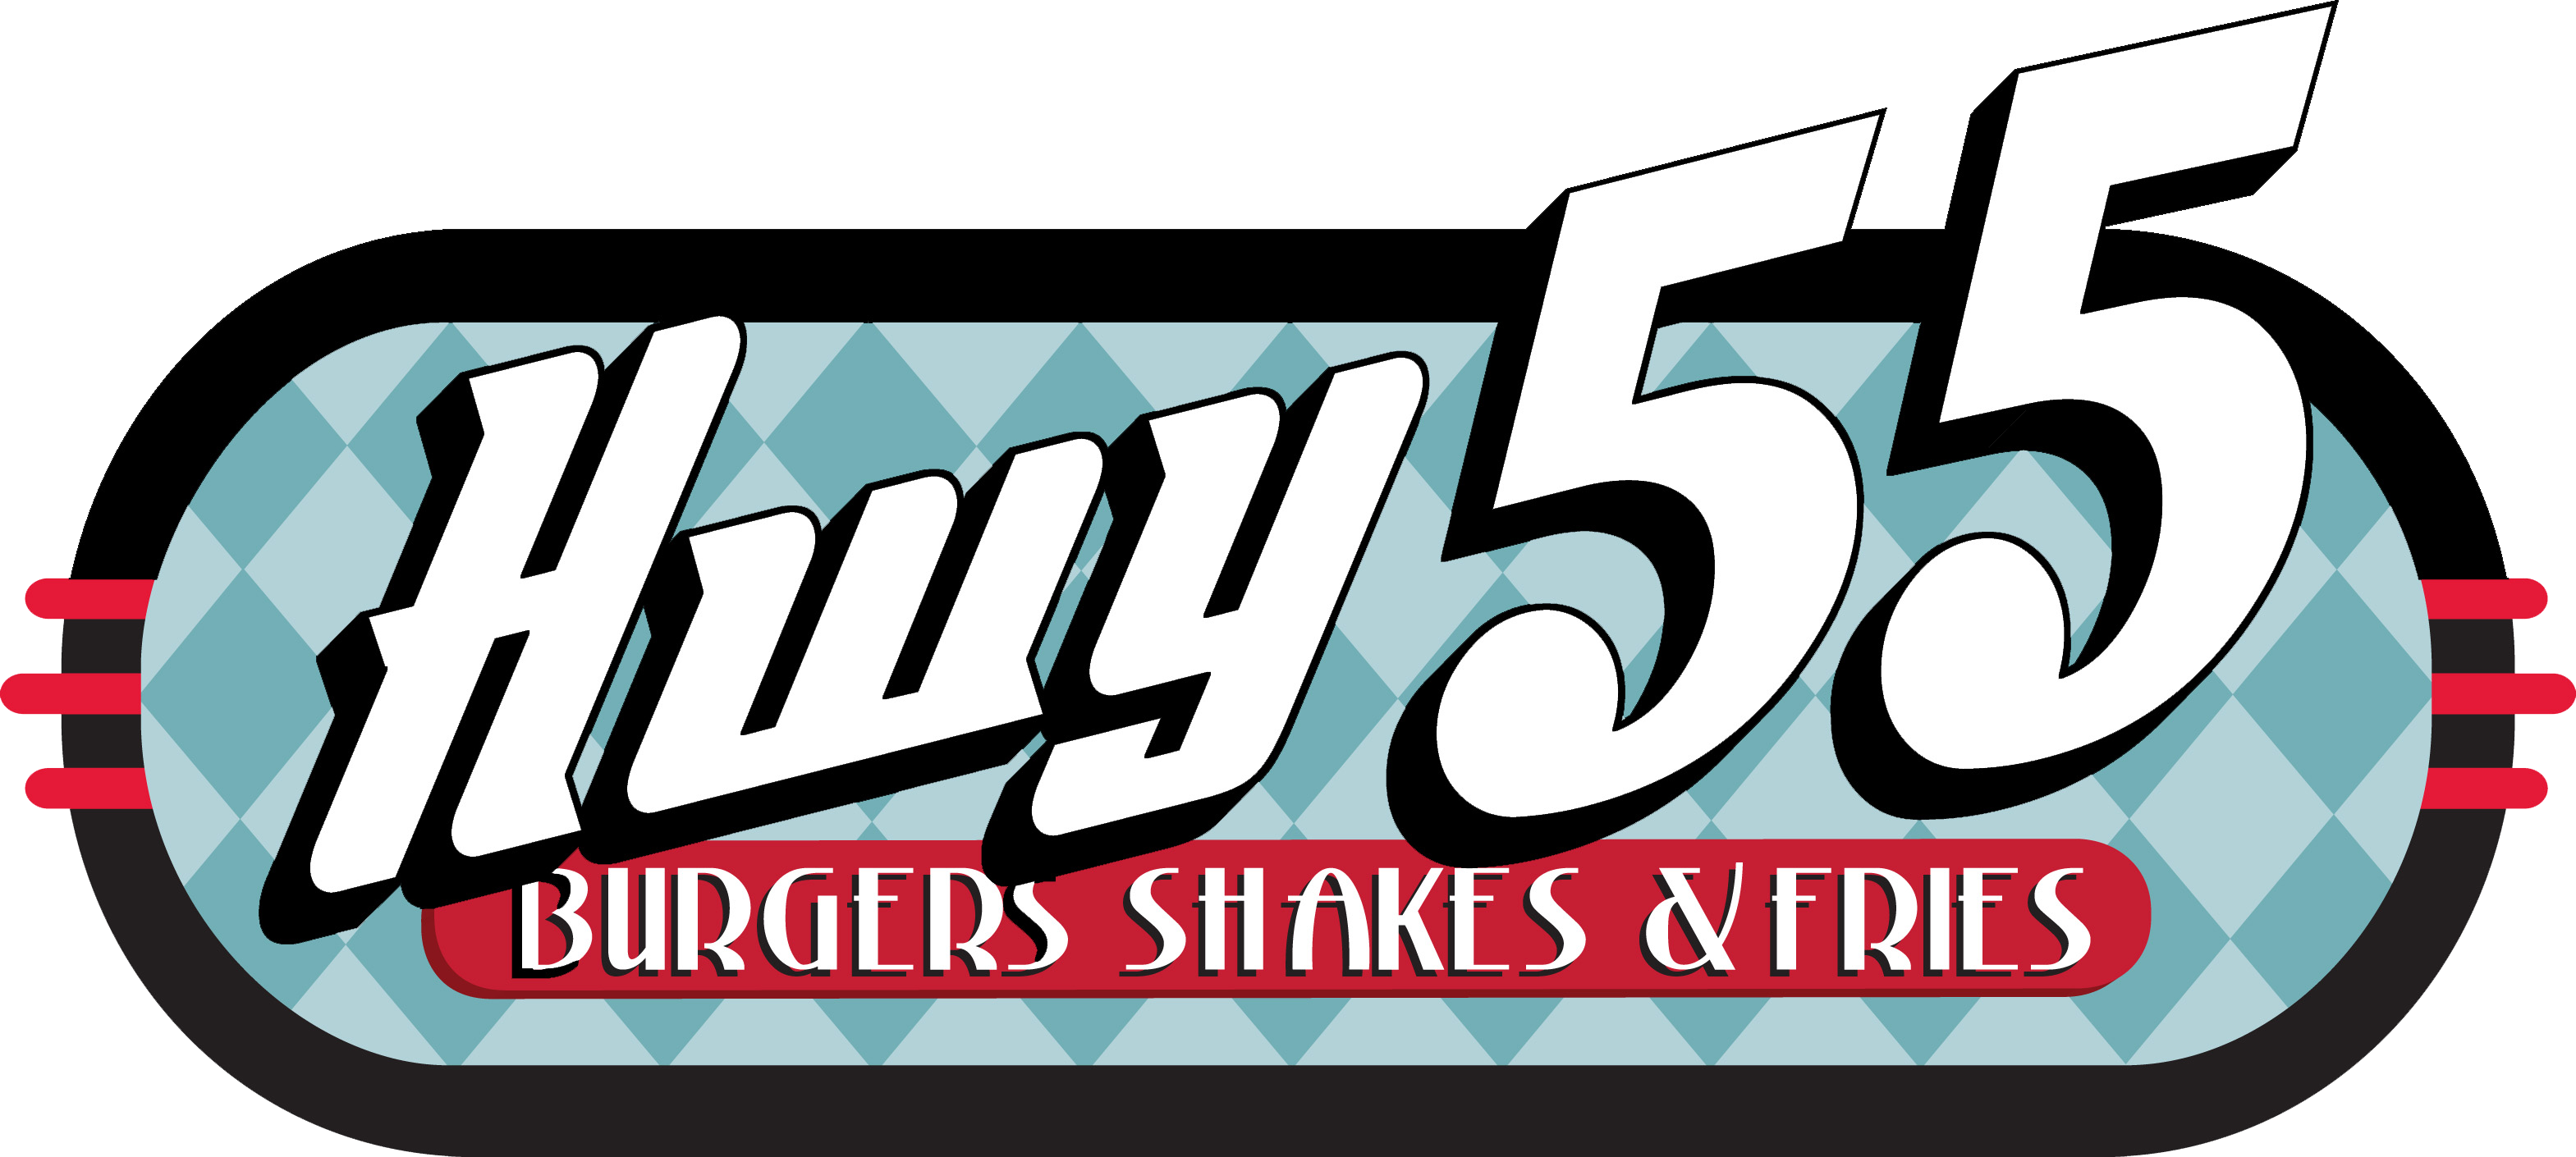 Why Not Try Hwy 55 Burgers Shakes & Fries In Myrtle - Hwy 55 Burgers Shakes & Fries (3138x1410)